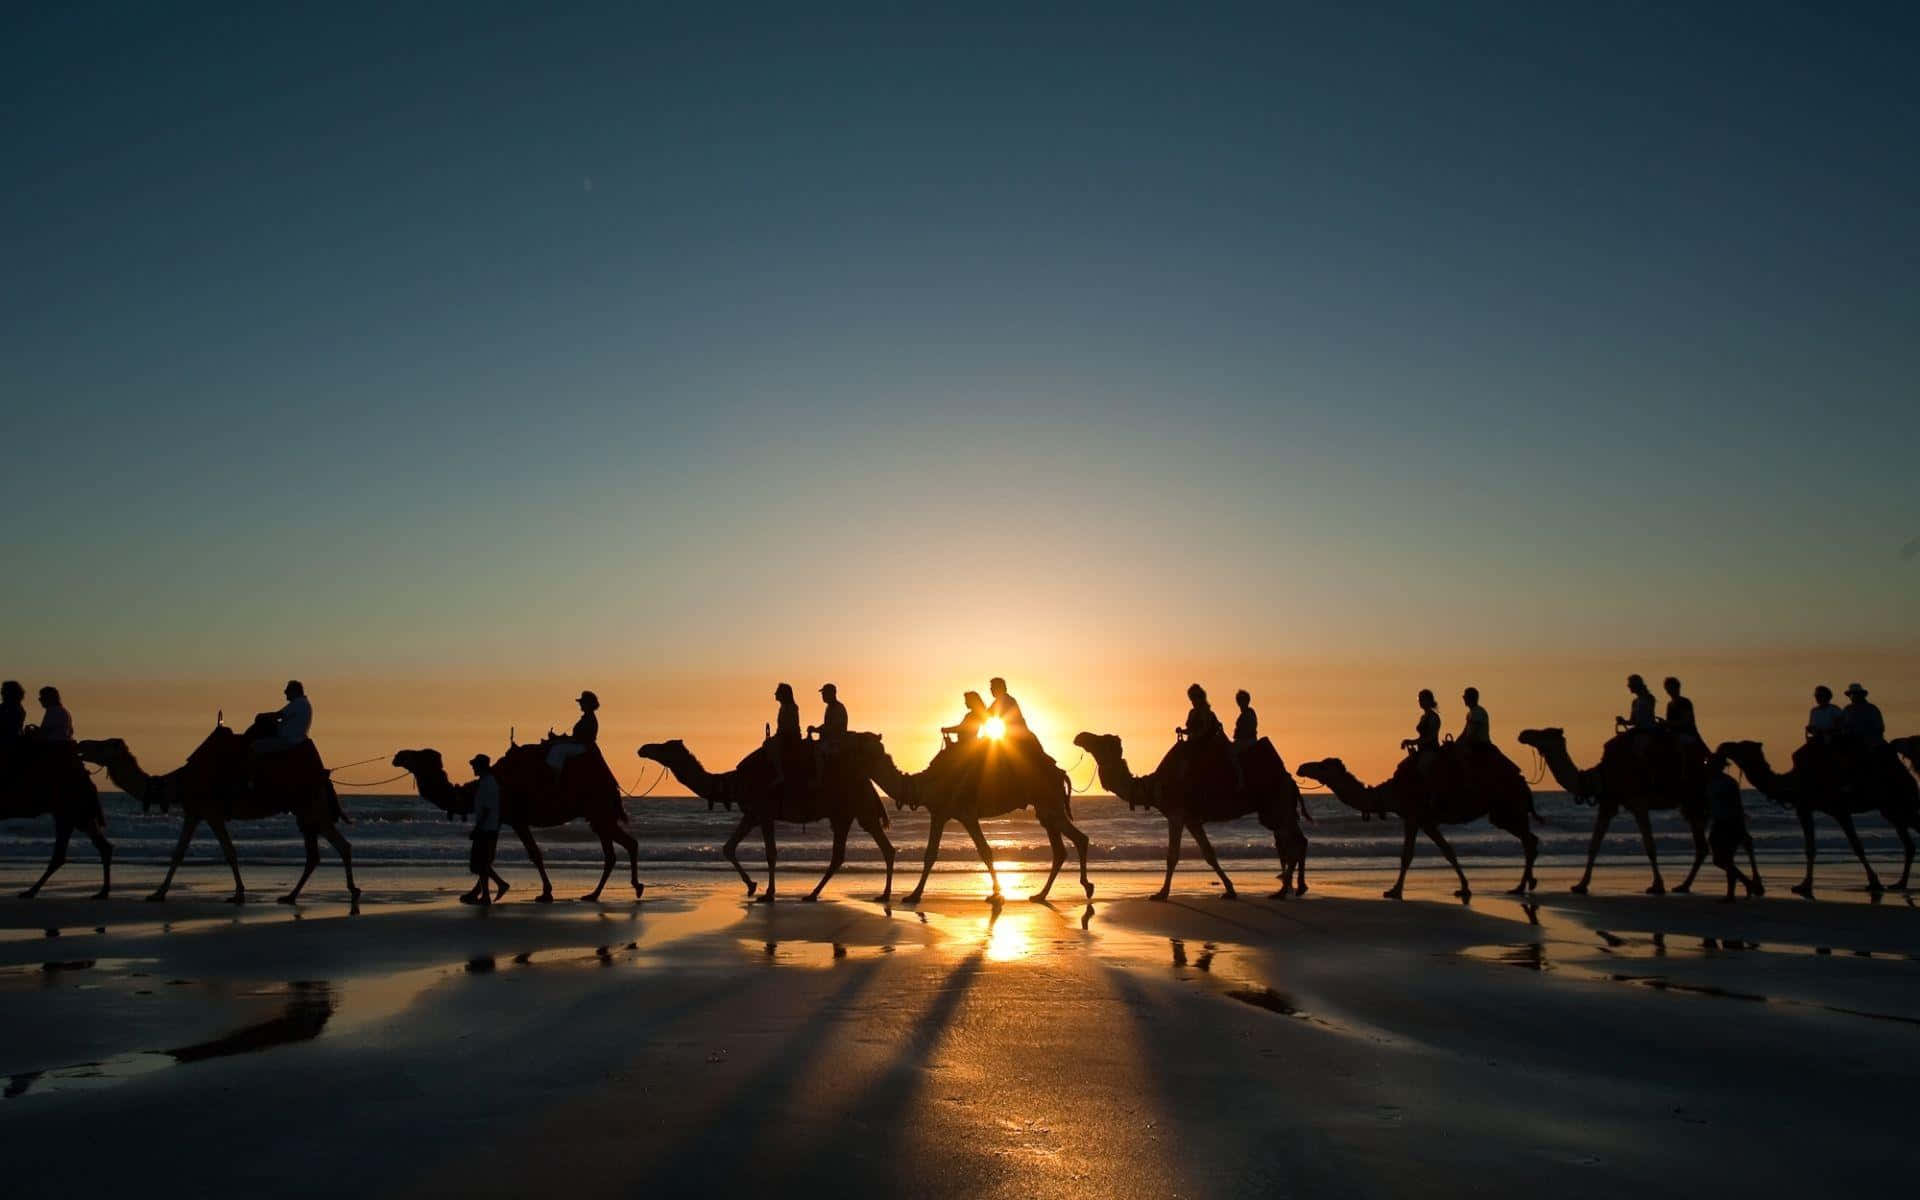 A Group Of People Riding Camels On The Beach At Sunset